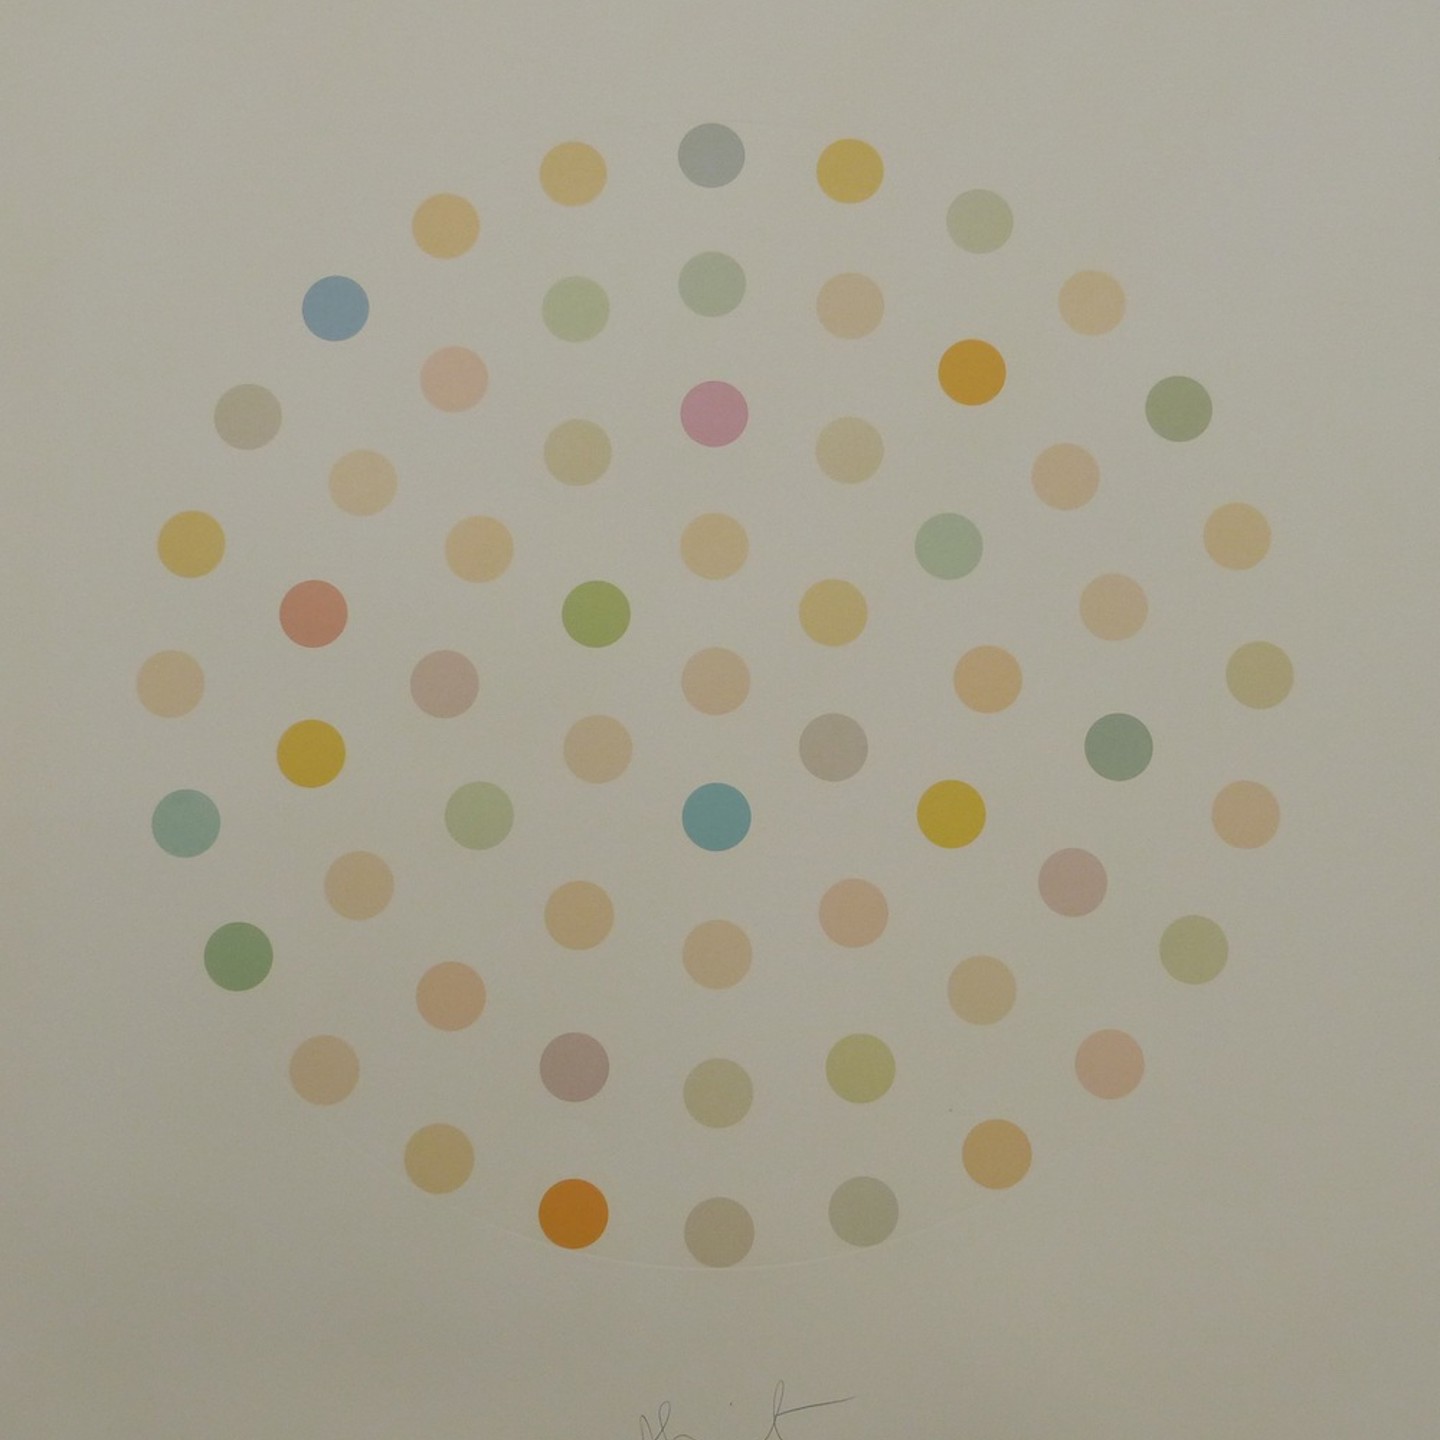 Damien Hirst (B1965) Ciclopirox Olamine Signed Limited Edition (38145) Colour Etching Sold Ś4,300